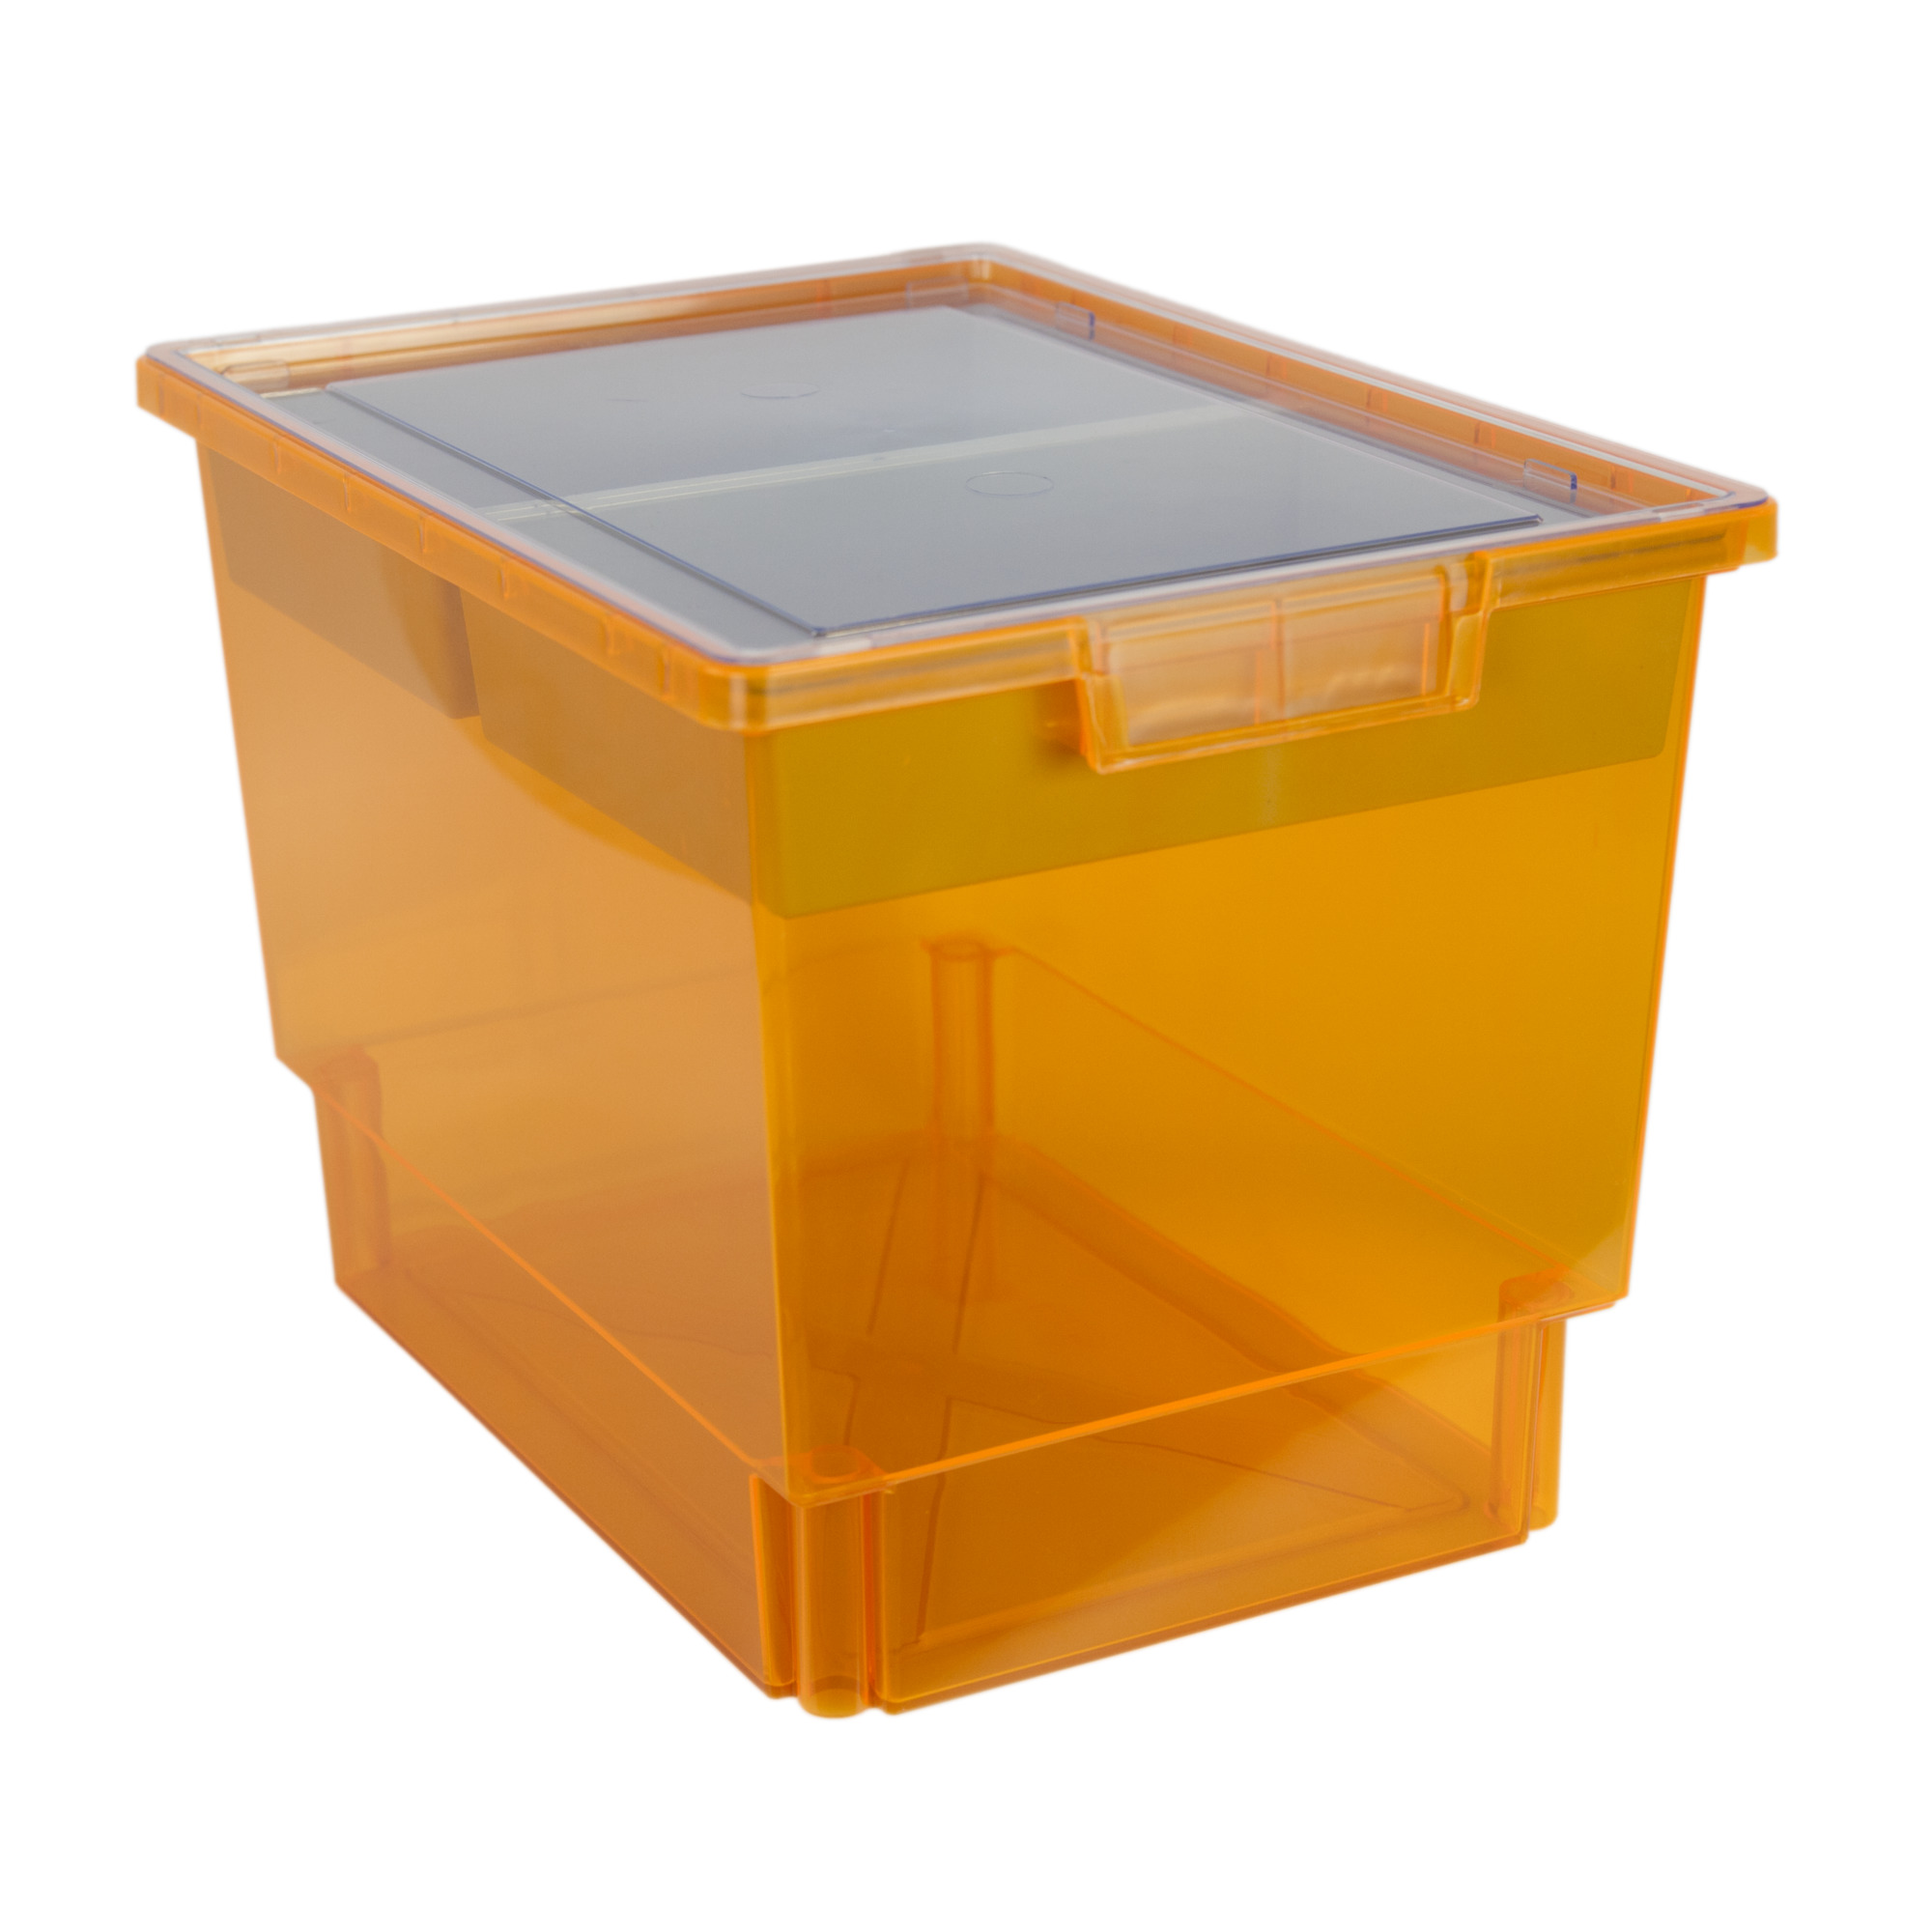 Certwood StorWerks, Slim Line 12Inch Tray Kit (2 x Divisions) Orange, Included (qty.) 1, Material Plastic, Height 9 in, Model CE1954FO-NK0404-1